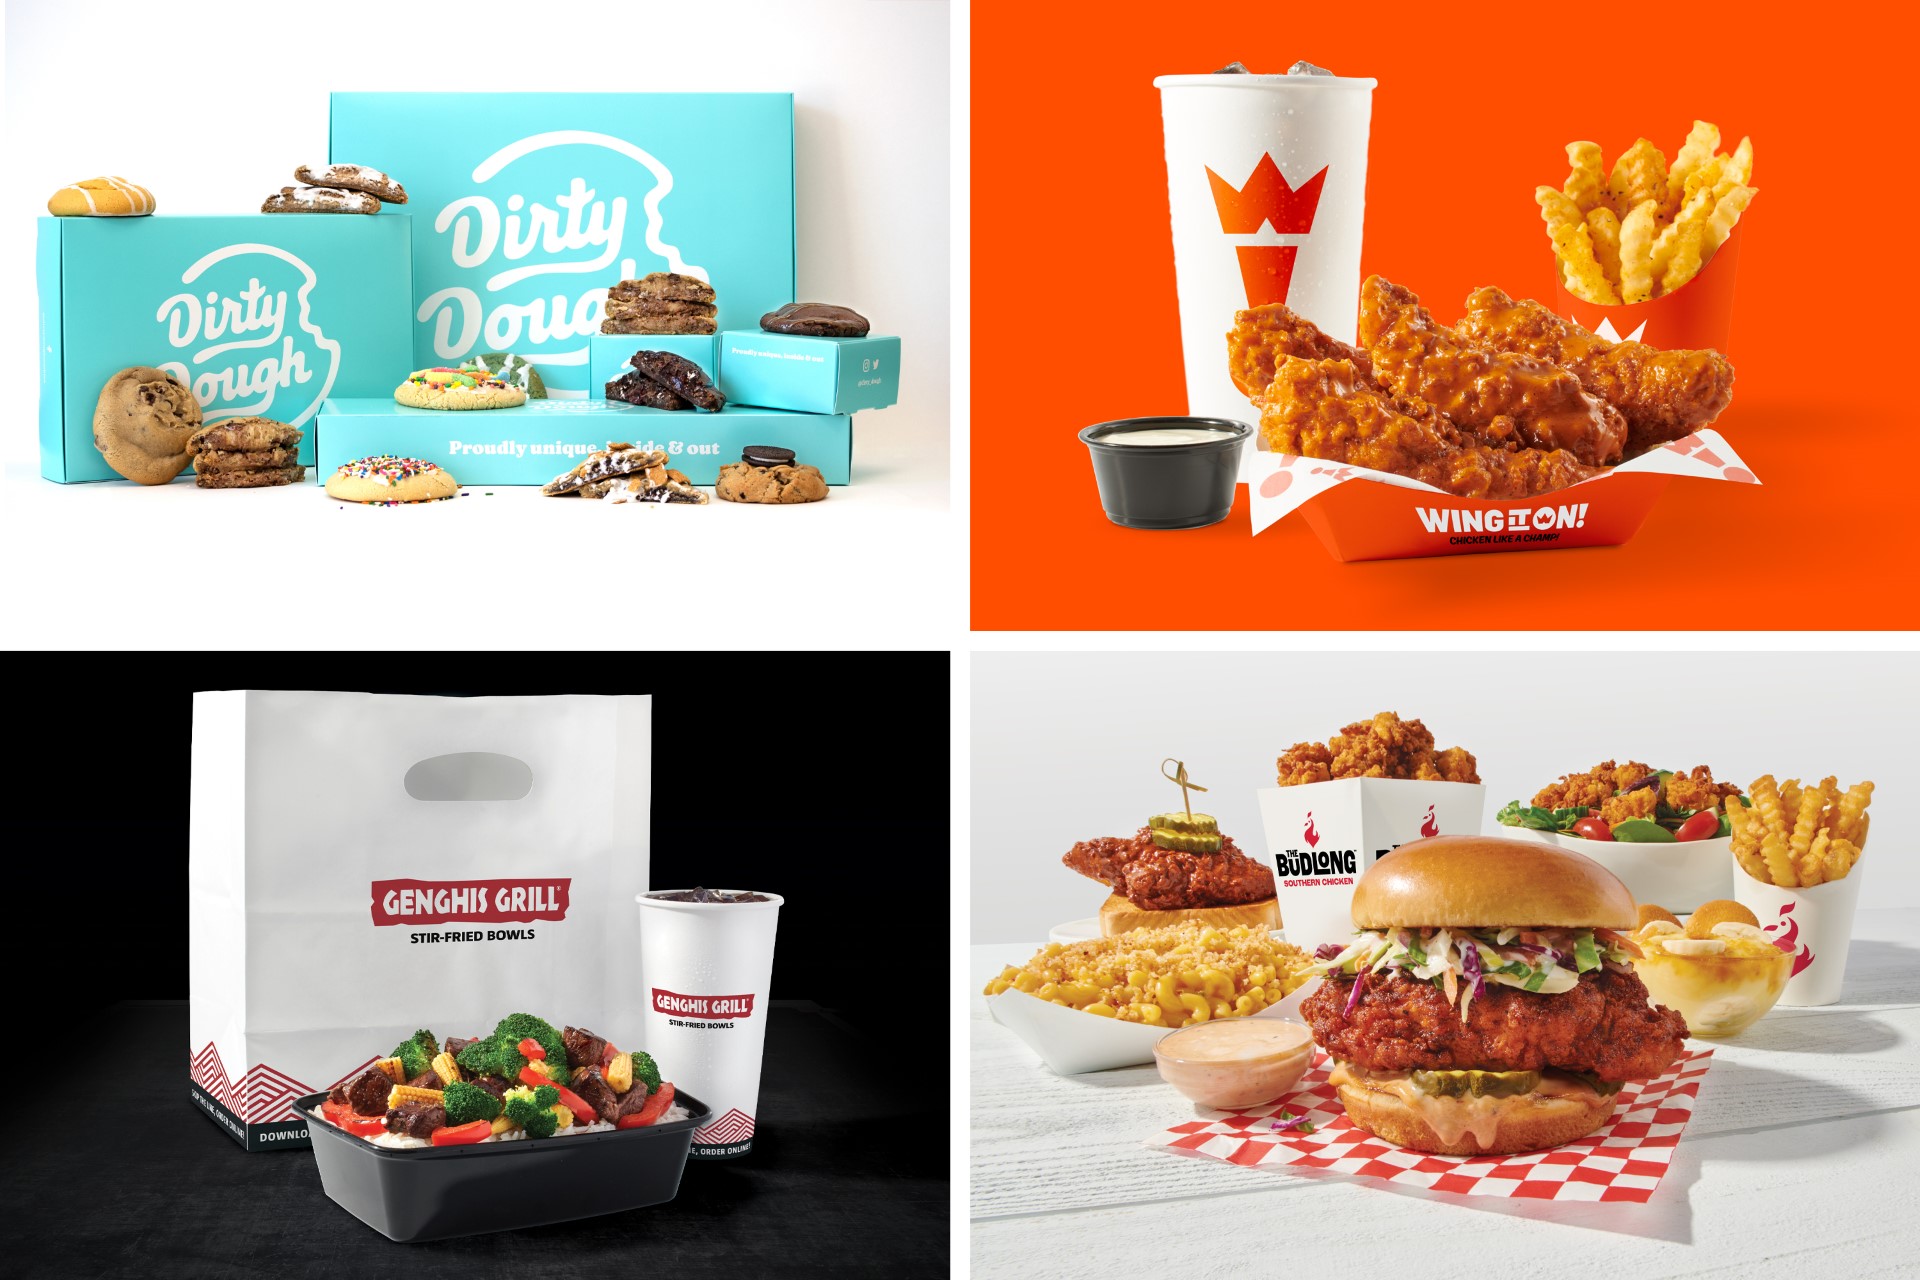 Four of the brands currently franchising under Craveworthy Brands: Dirty Dough, Wing It On!, Genghis Grill and The Budlong Southern Chicken